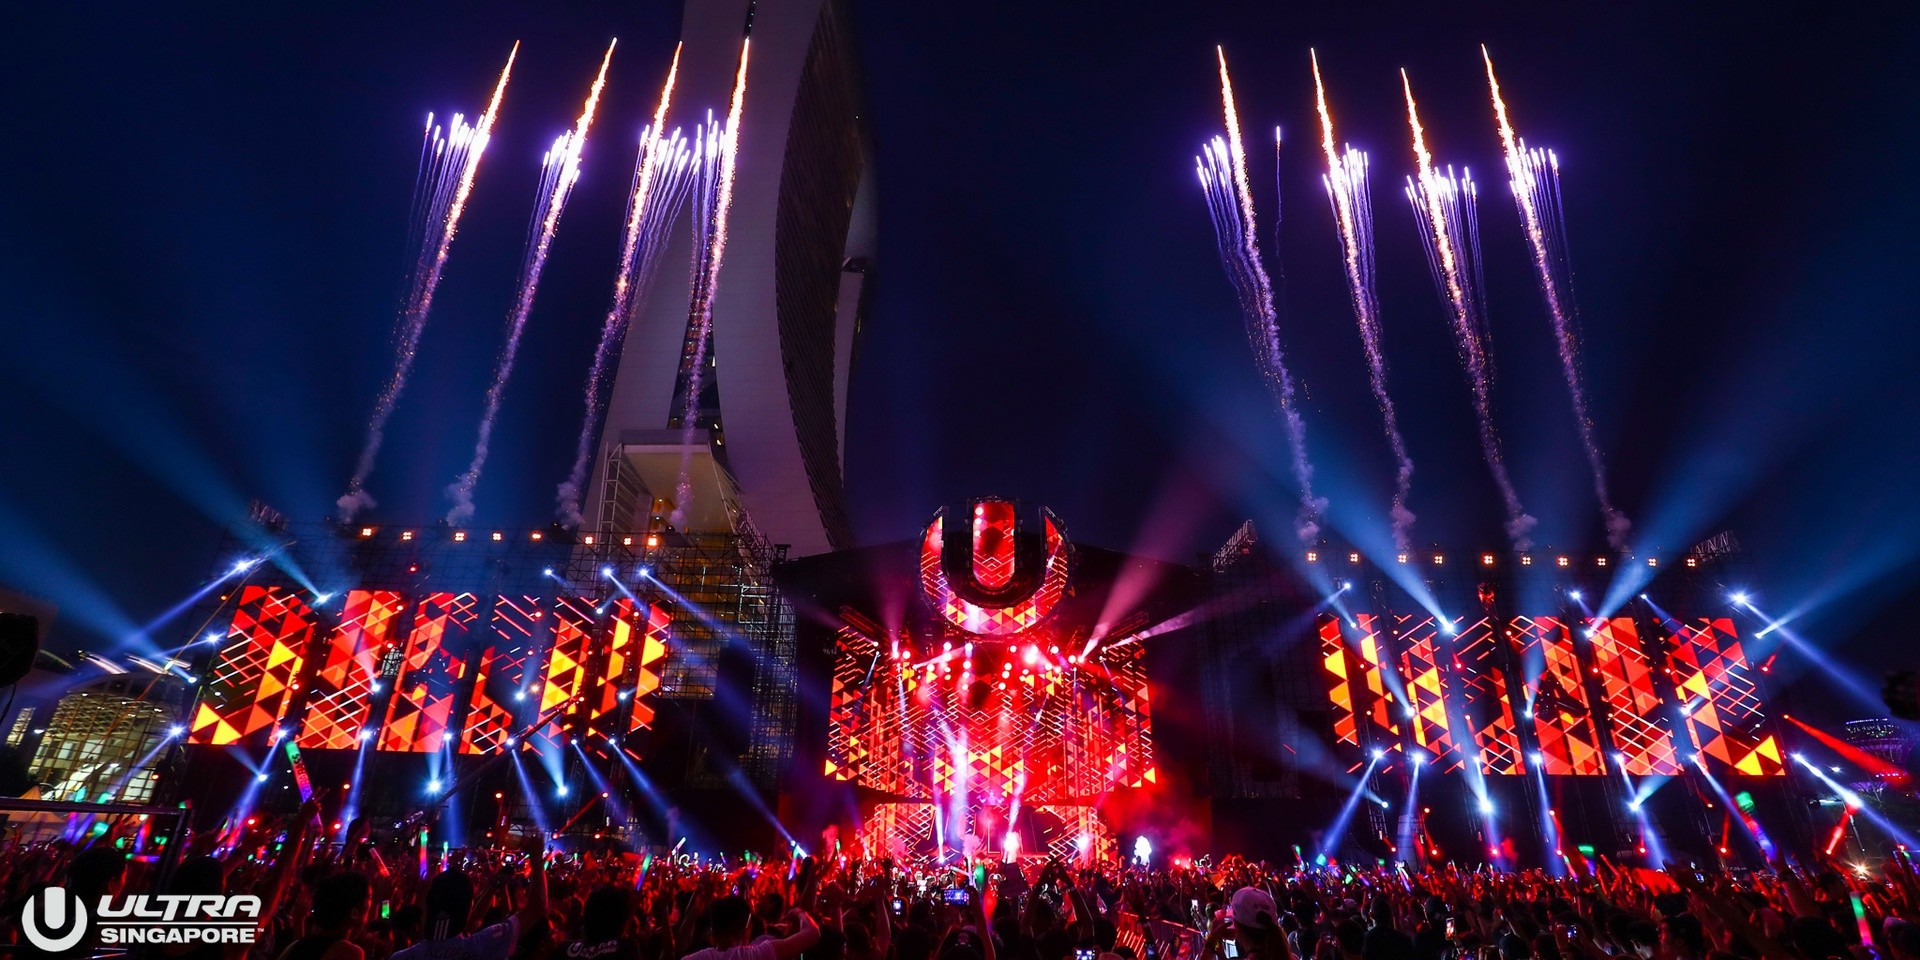 All you need to know about Ultra Singapore 2017